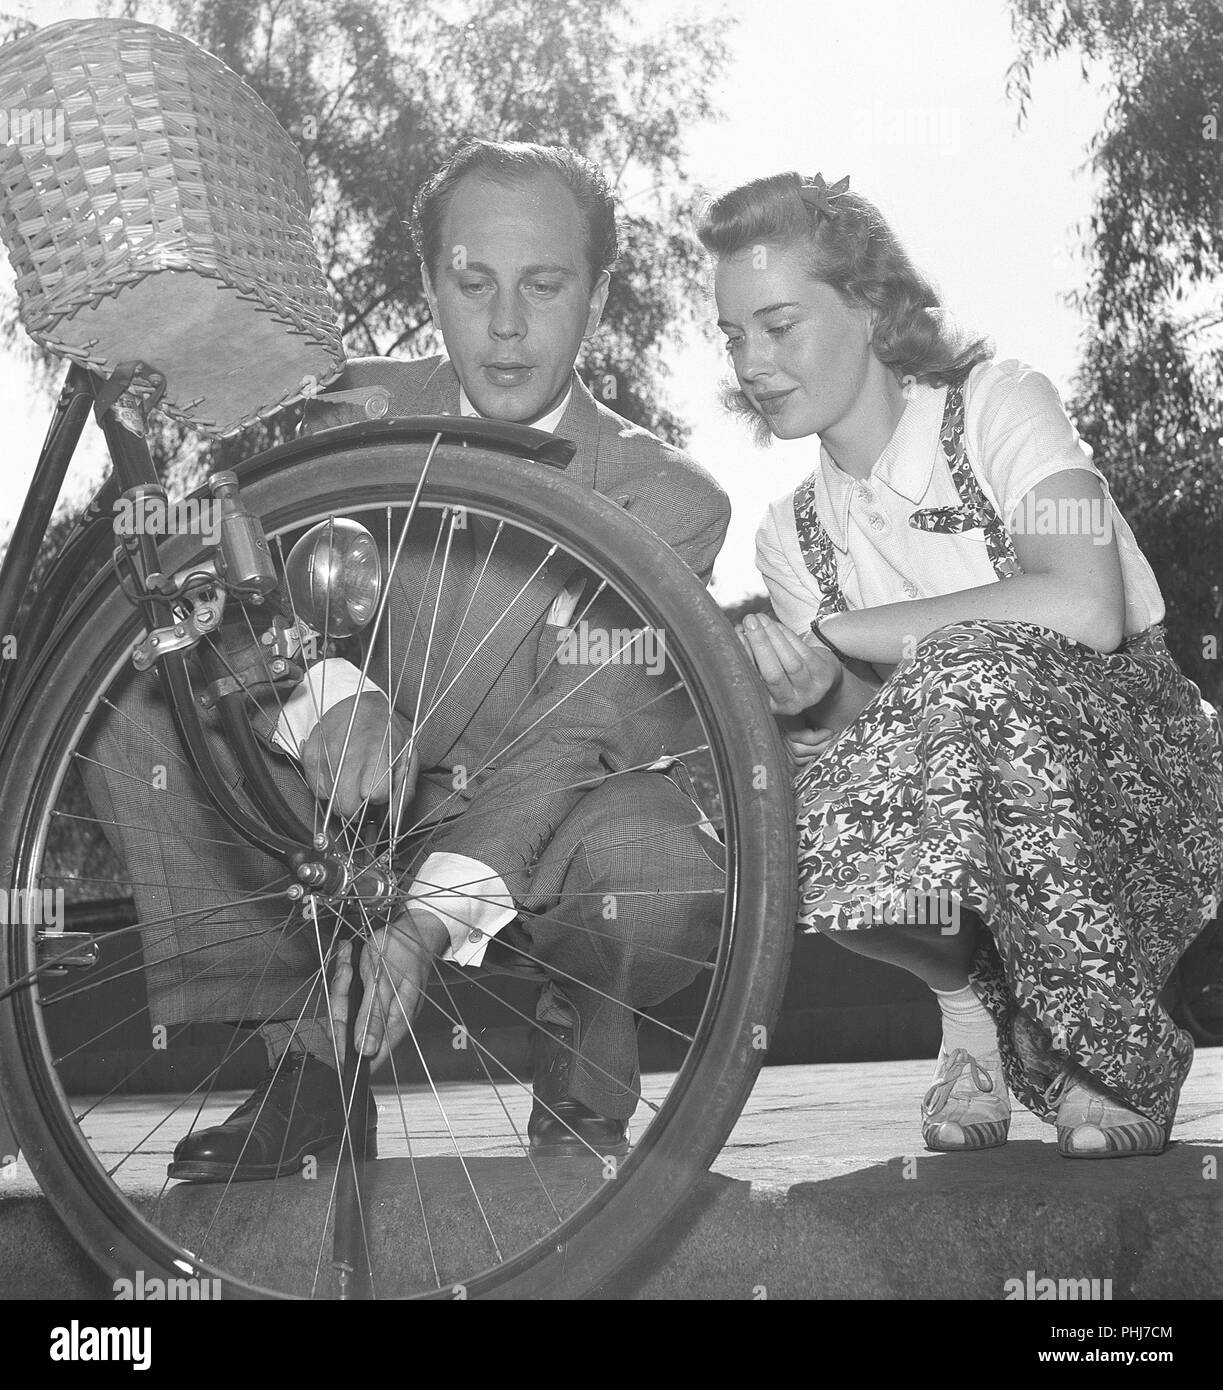 1940s couple with a bicycle. Actor Willy Peters is seen here pumping air into the tire of a womans bicycle while she is sitting beside him and looking. Sweden 1940s.  Photo Kristoffersson E50-3 Stock Photo